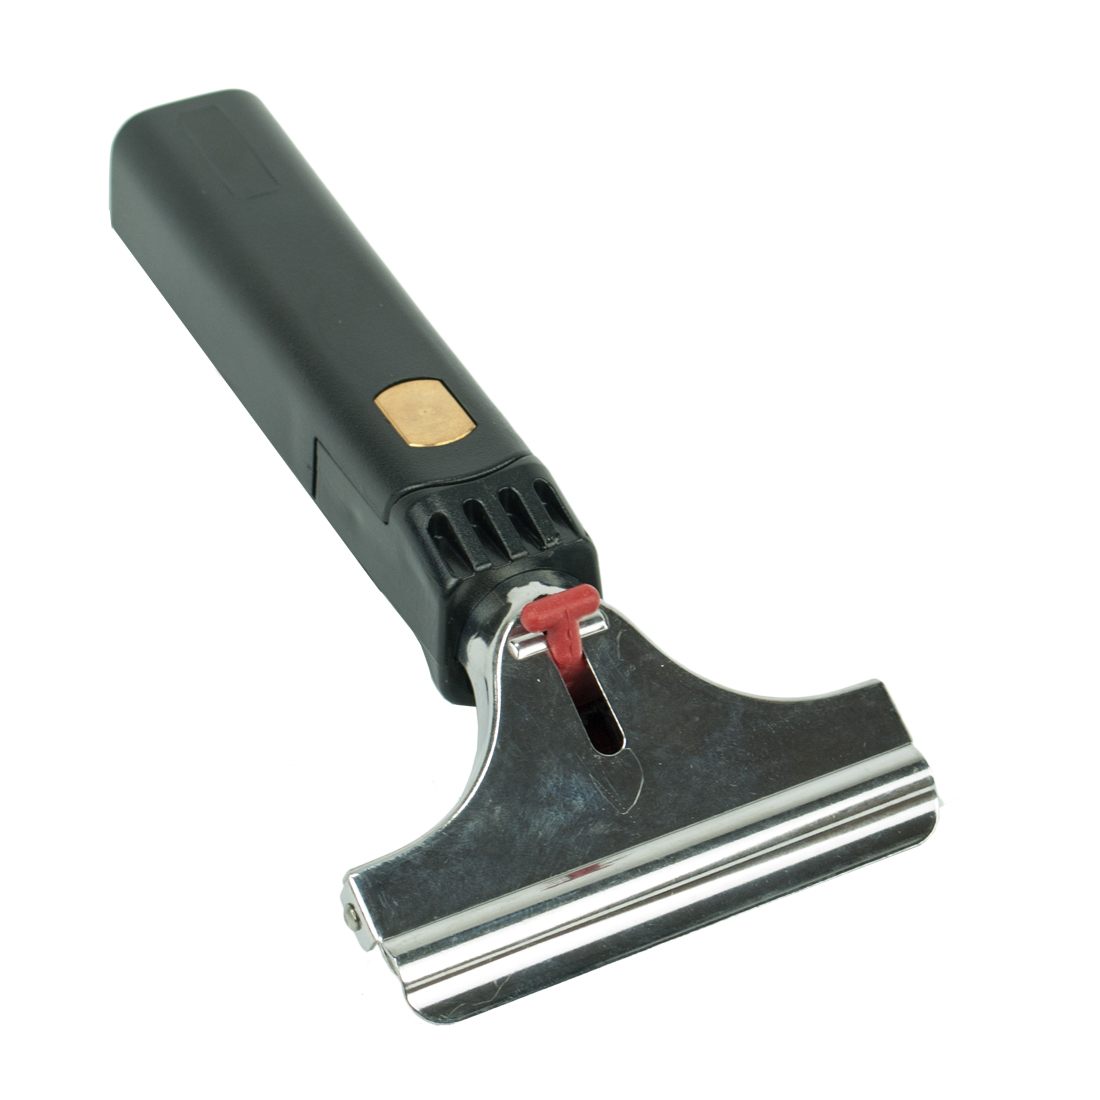 Pulex Swivel Stutzy Squeegee Handle - Oblique Top View